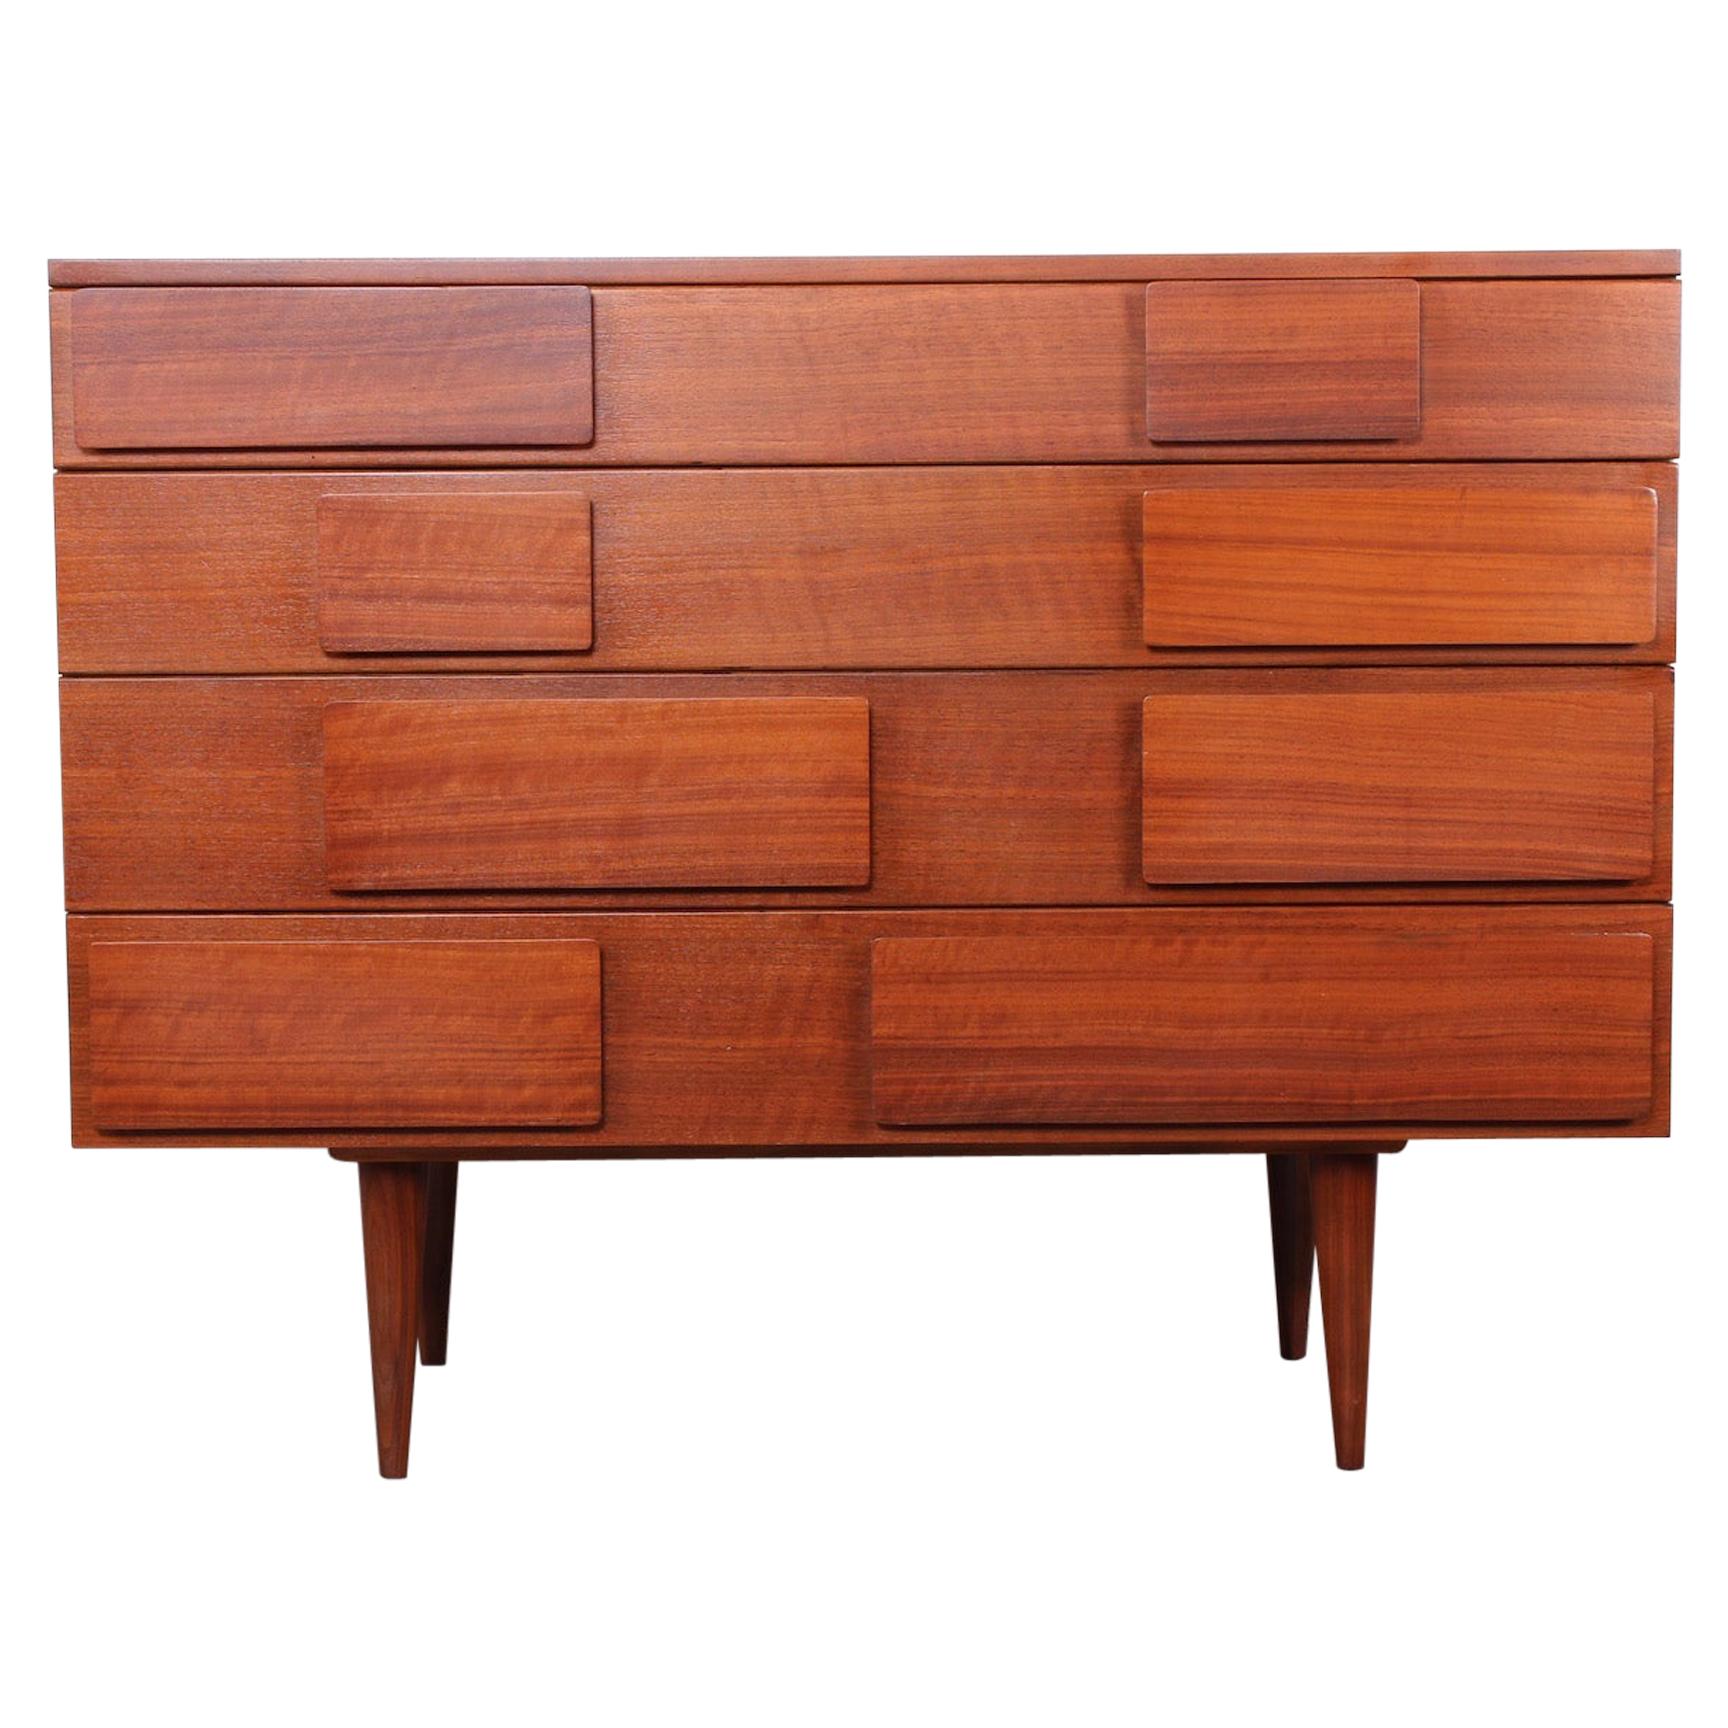 Gio Ponti for Singer & Sons Cabinet, Model 2129